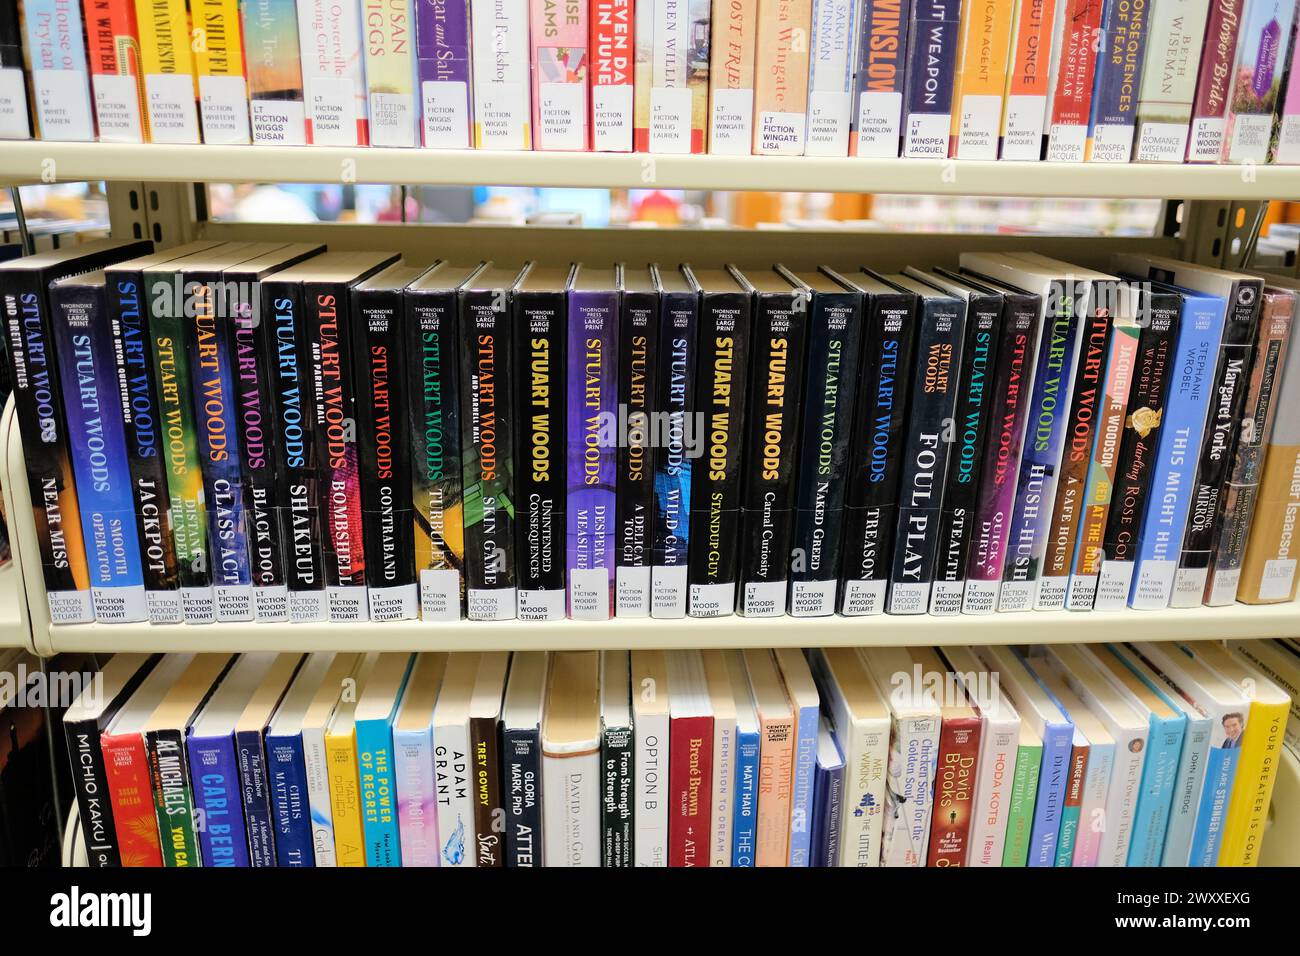 Library bookshelf with mystery novels by American writer Stuart Woods; police detective Stone Barrington Series of books on public library shelf. Stock Photo